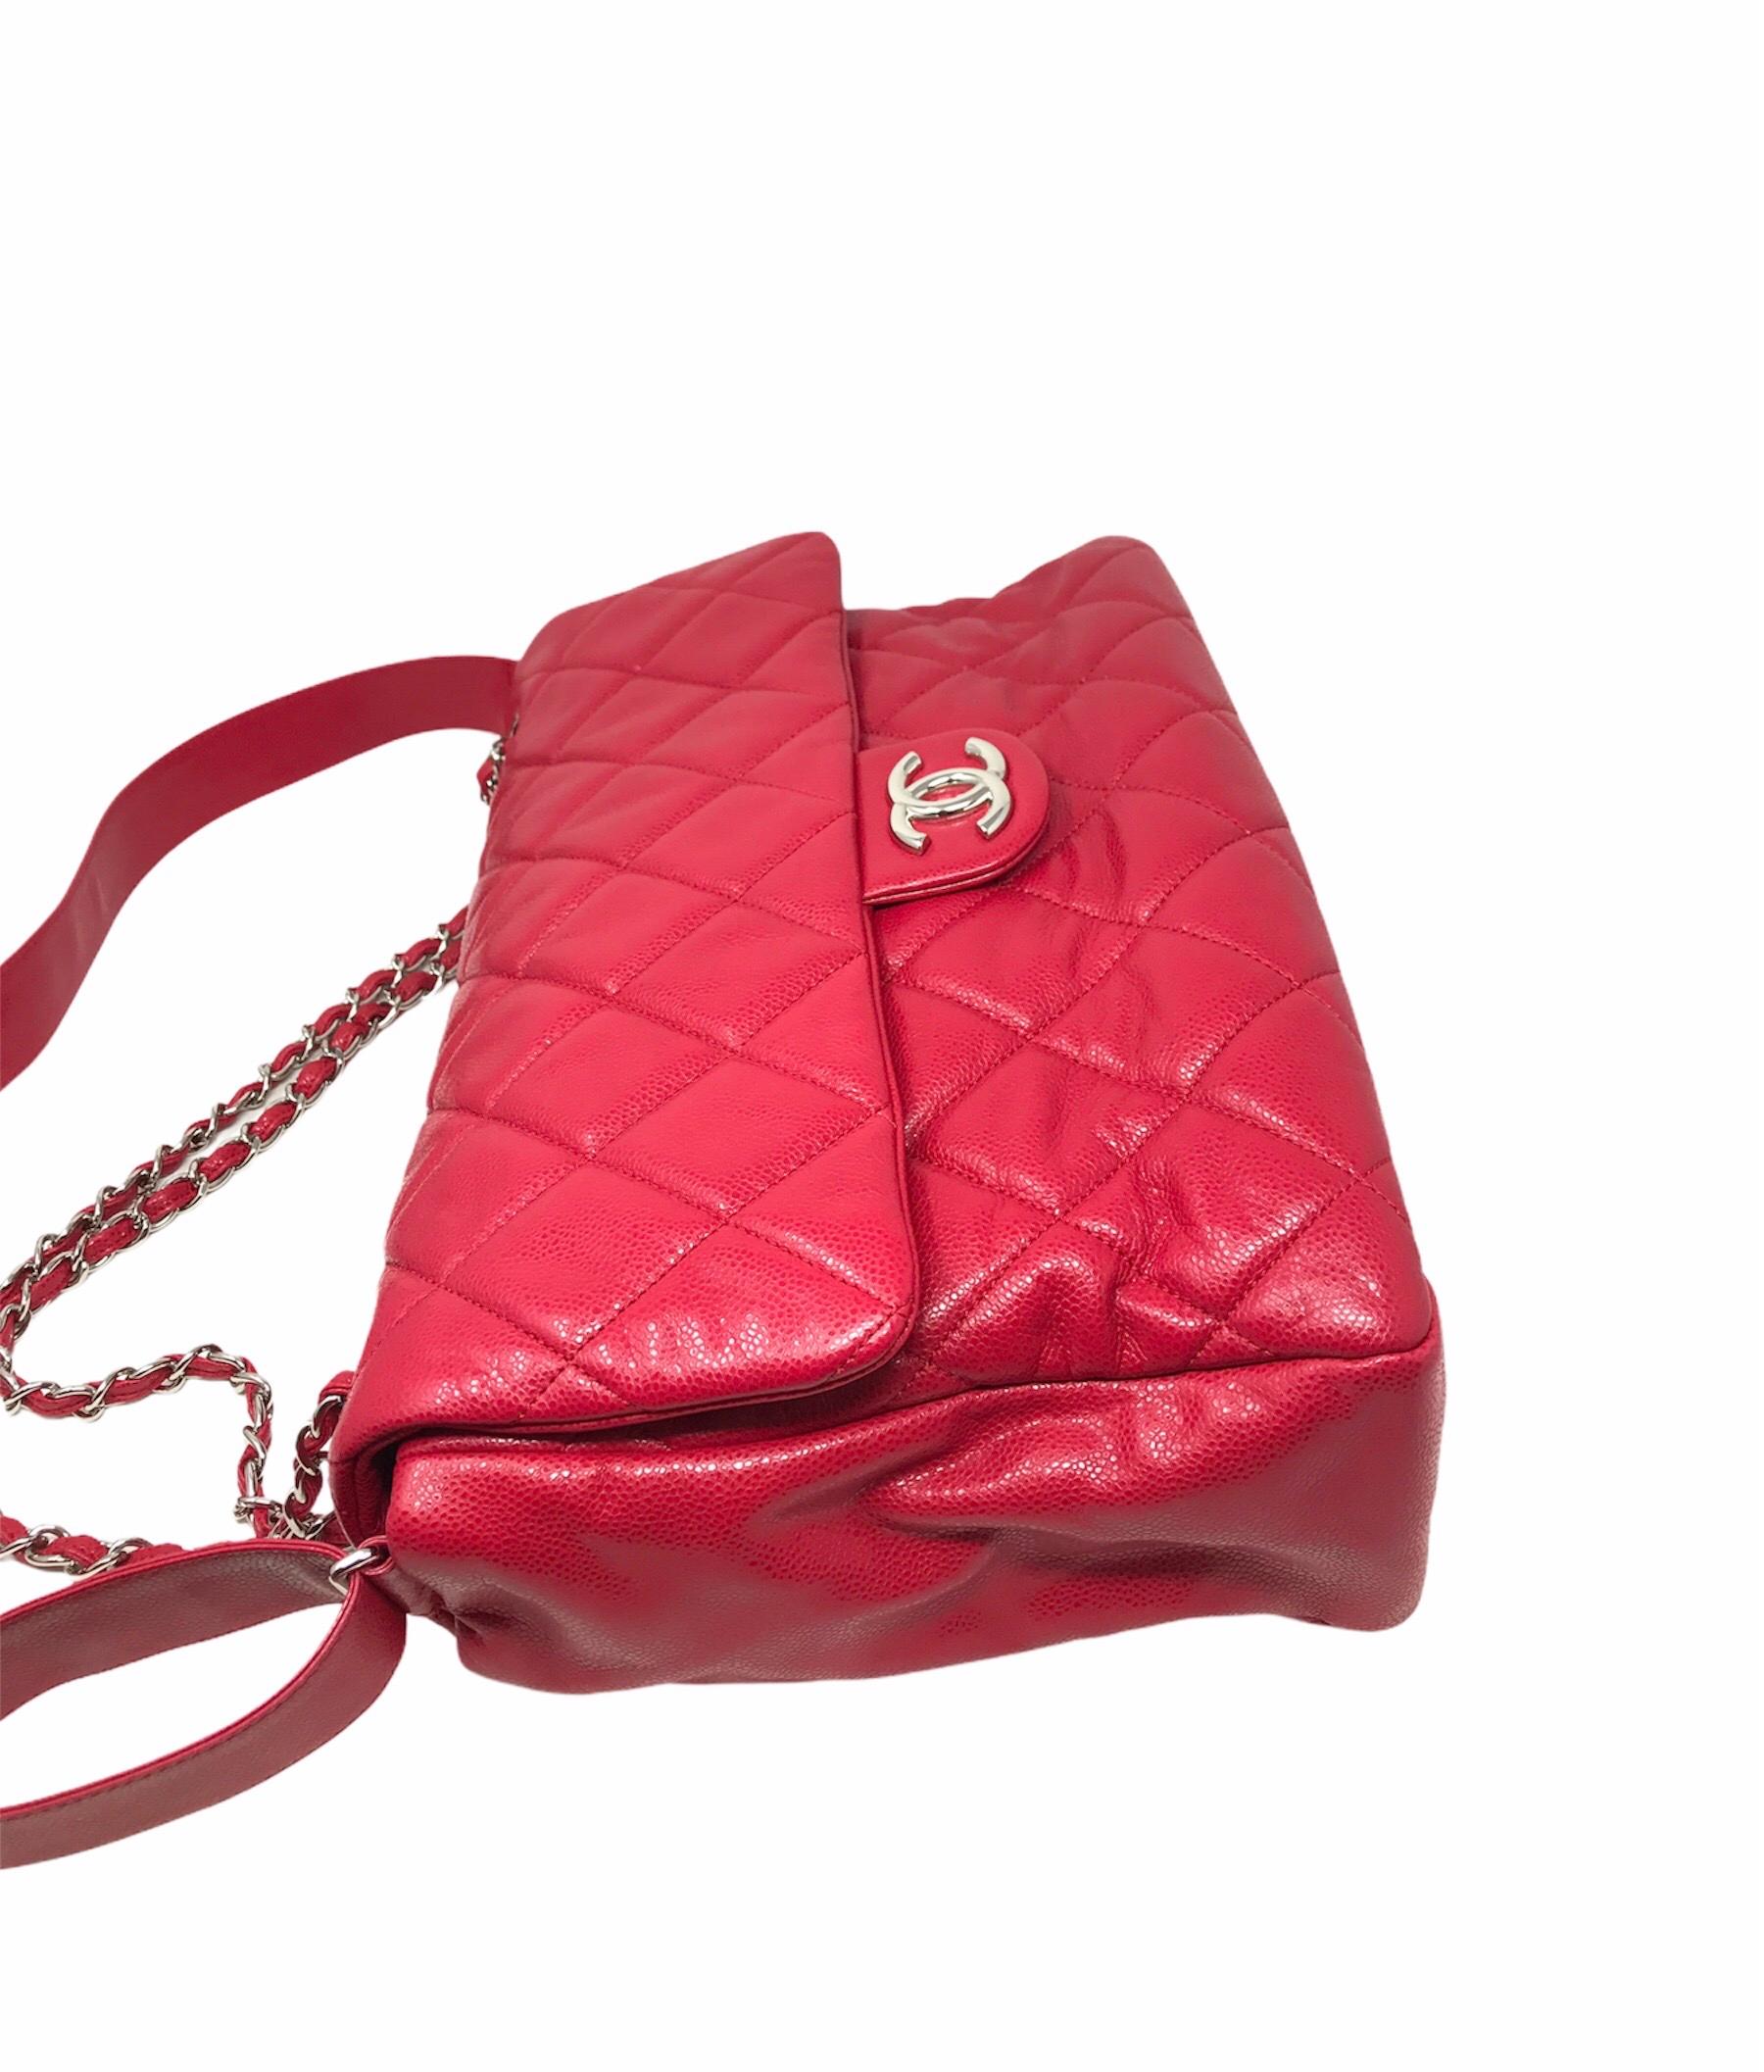 Women's CHANEL:  Timeless/Classique Leather Bag For Sale